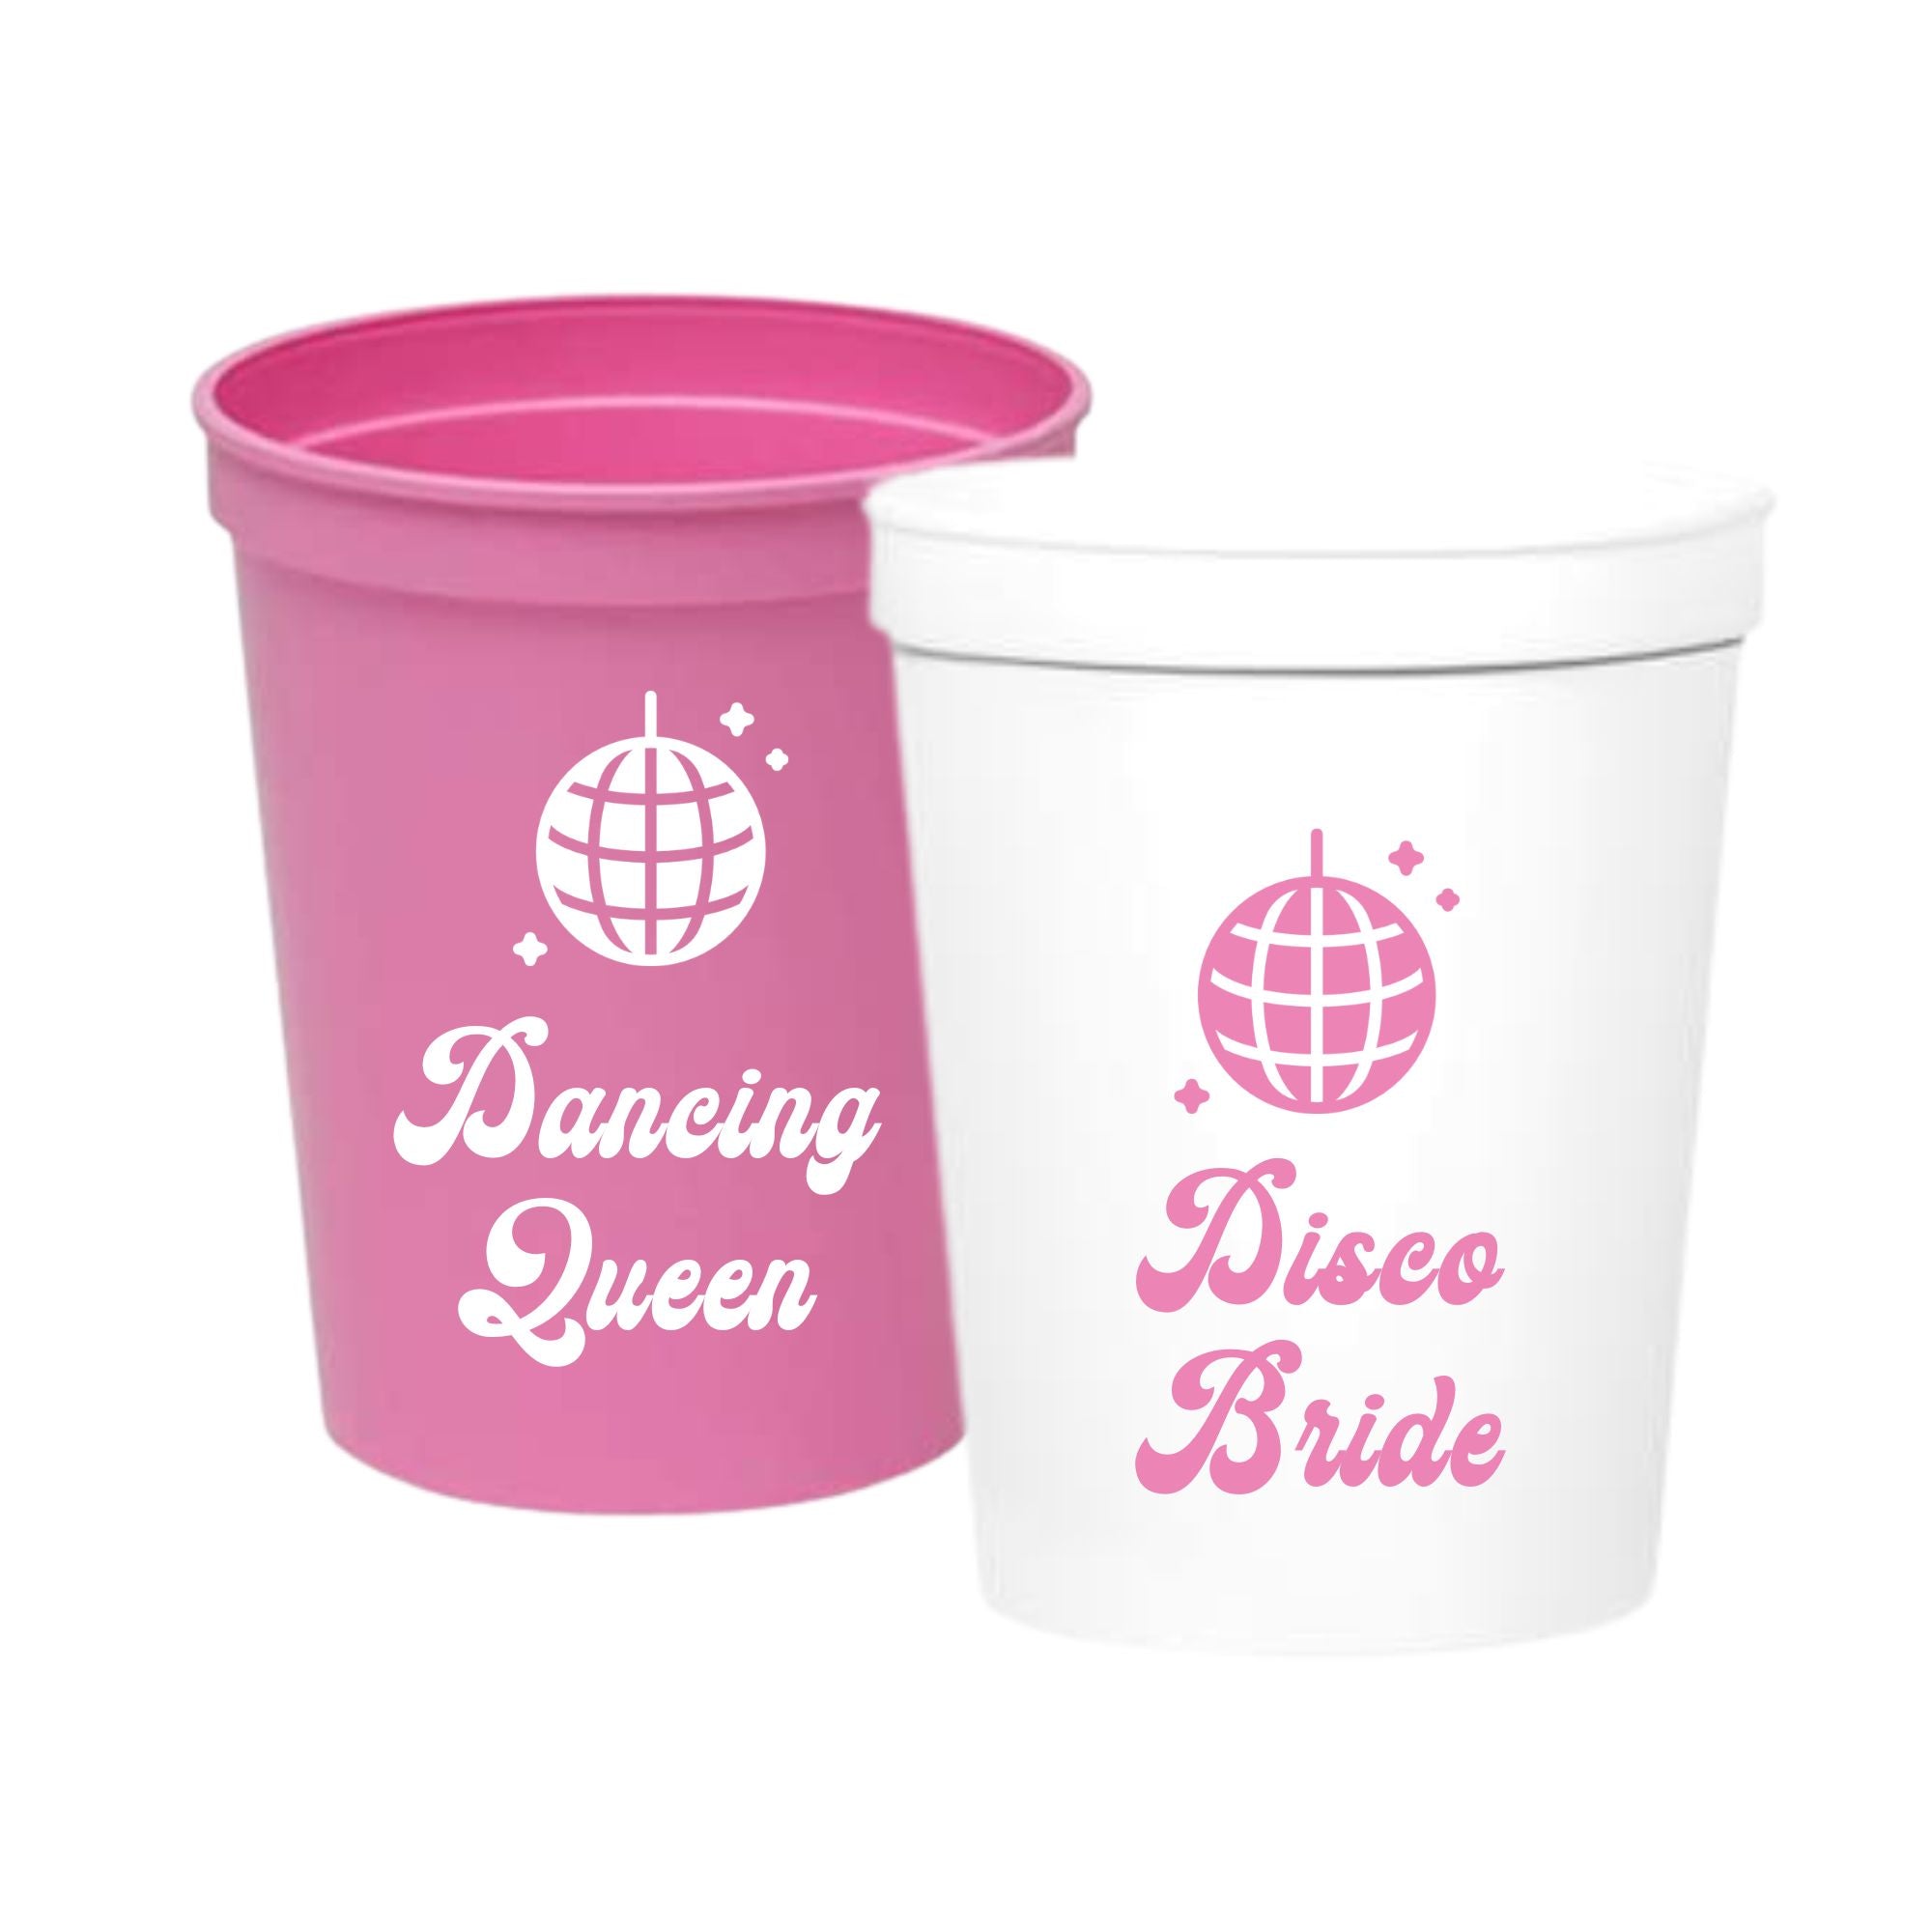 Disco Bride / Dancing Queen Stadium Cup - Sprinkled With Pink #bachelorette #custom #gifts